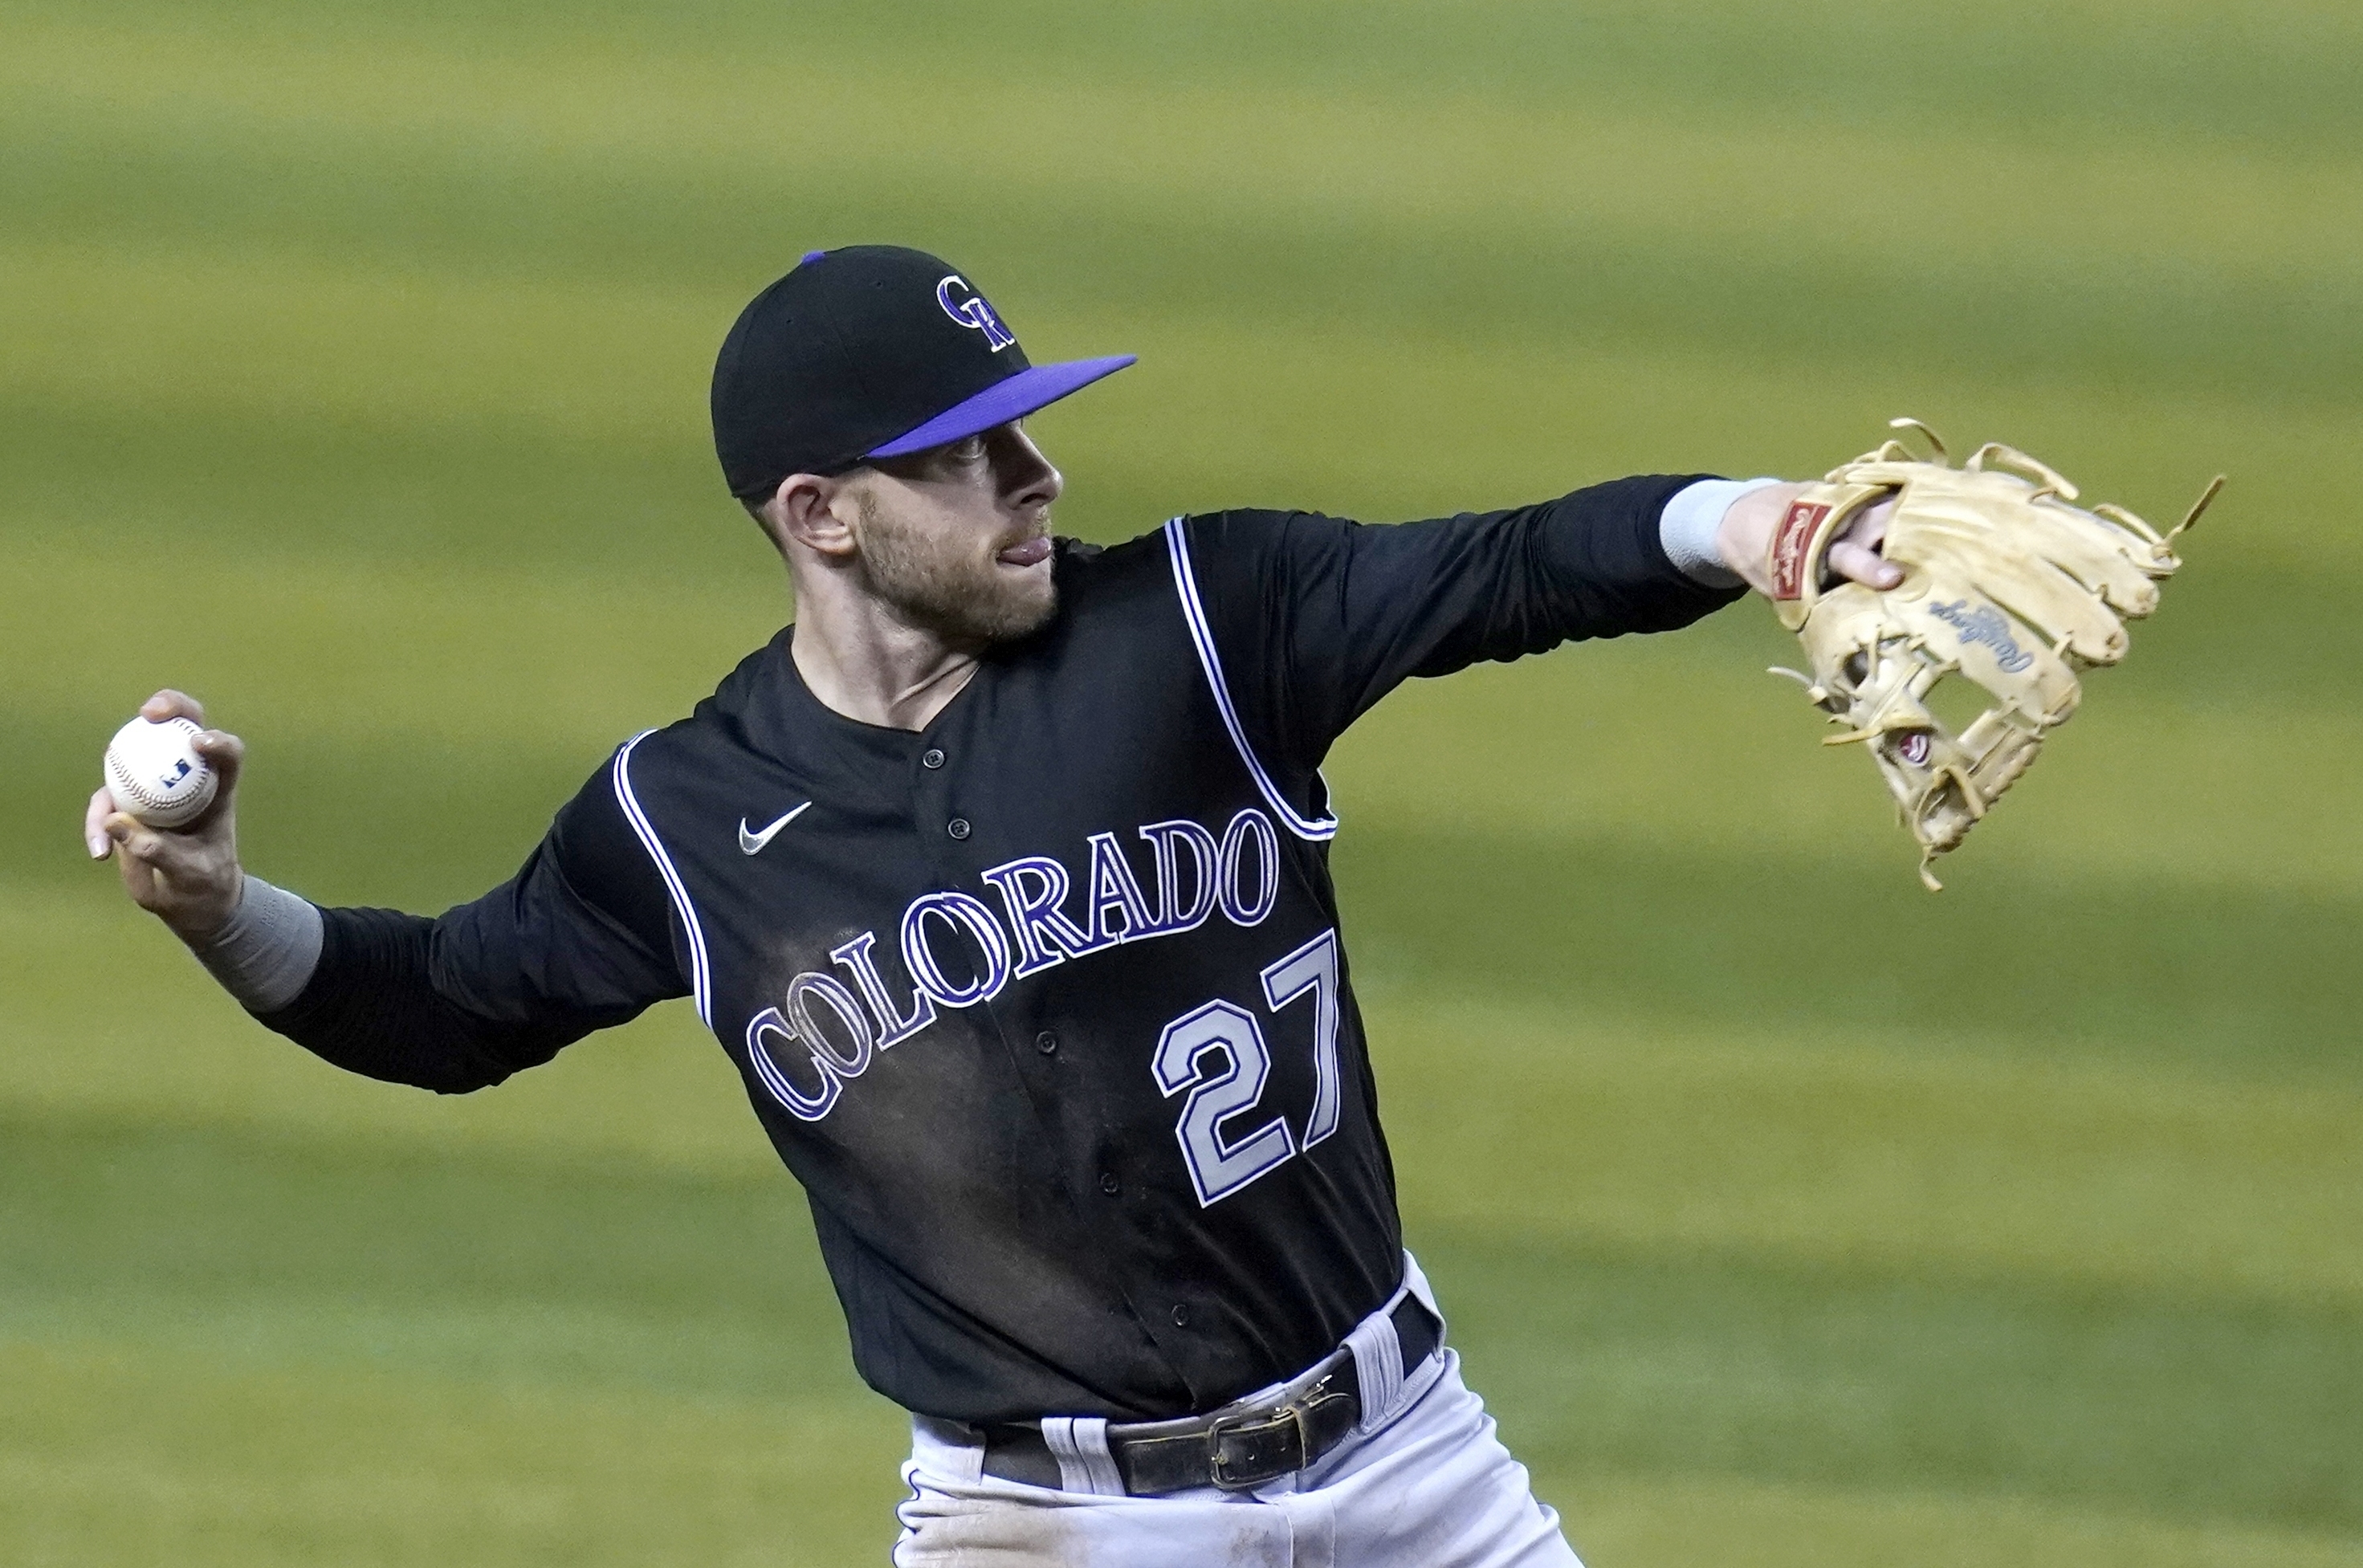 Trevor Story trade rumors: Rockies seeing action on their star SS